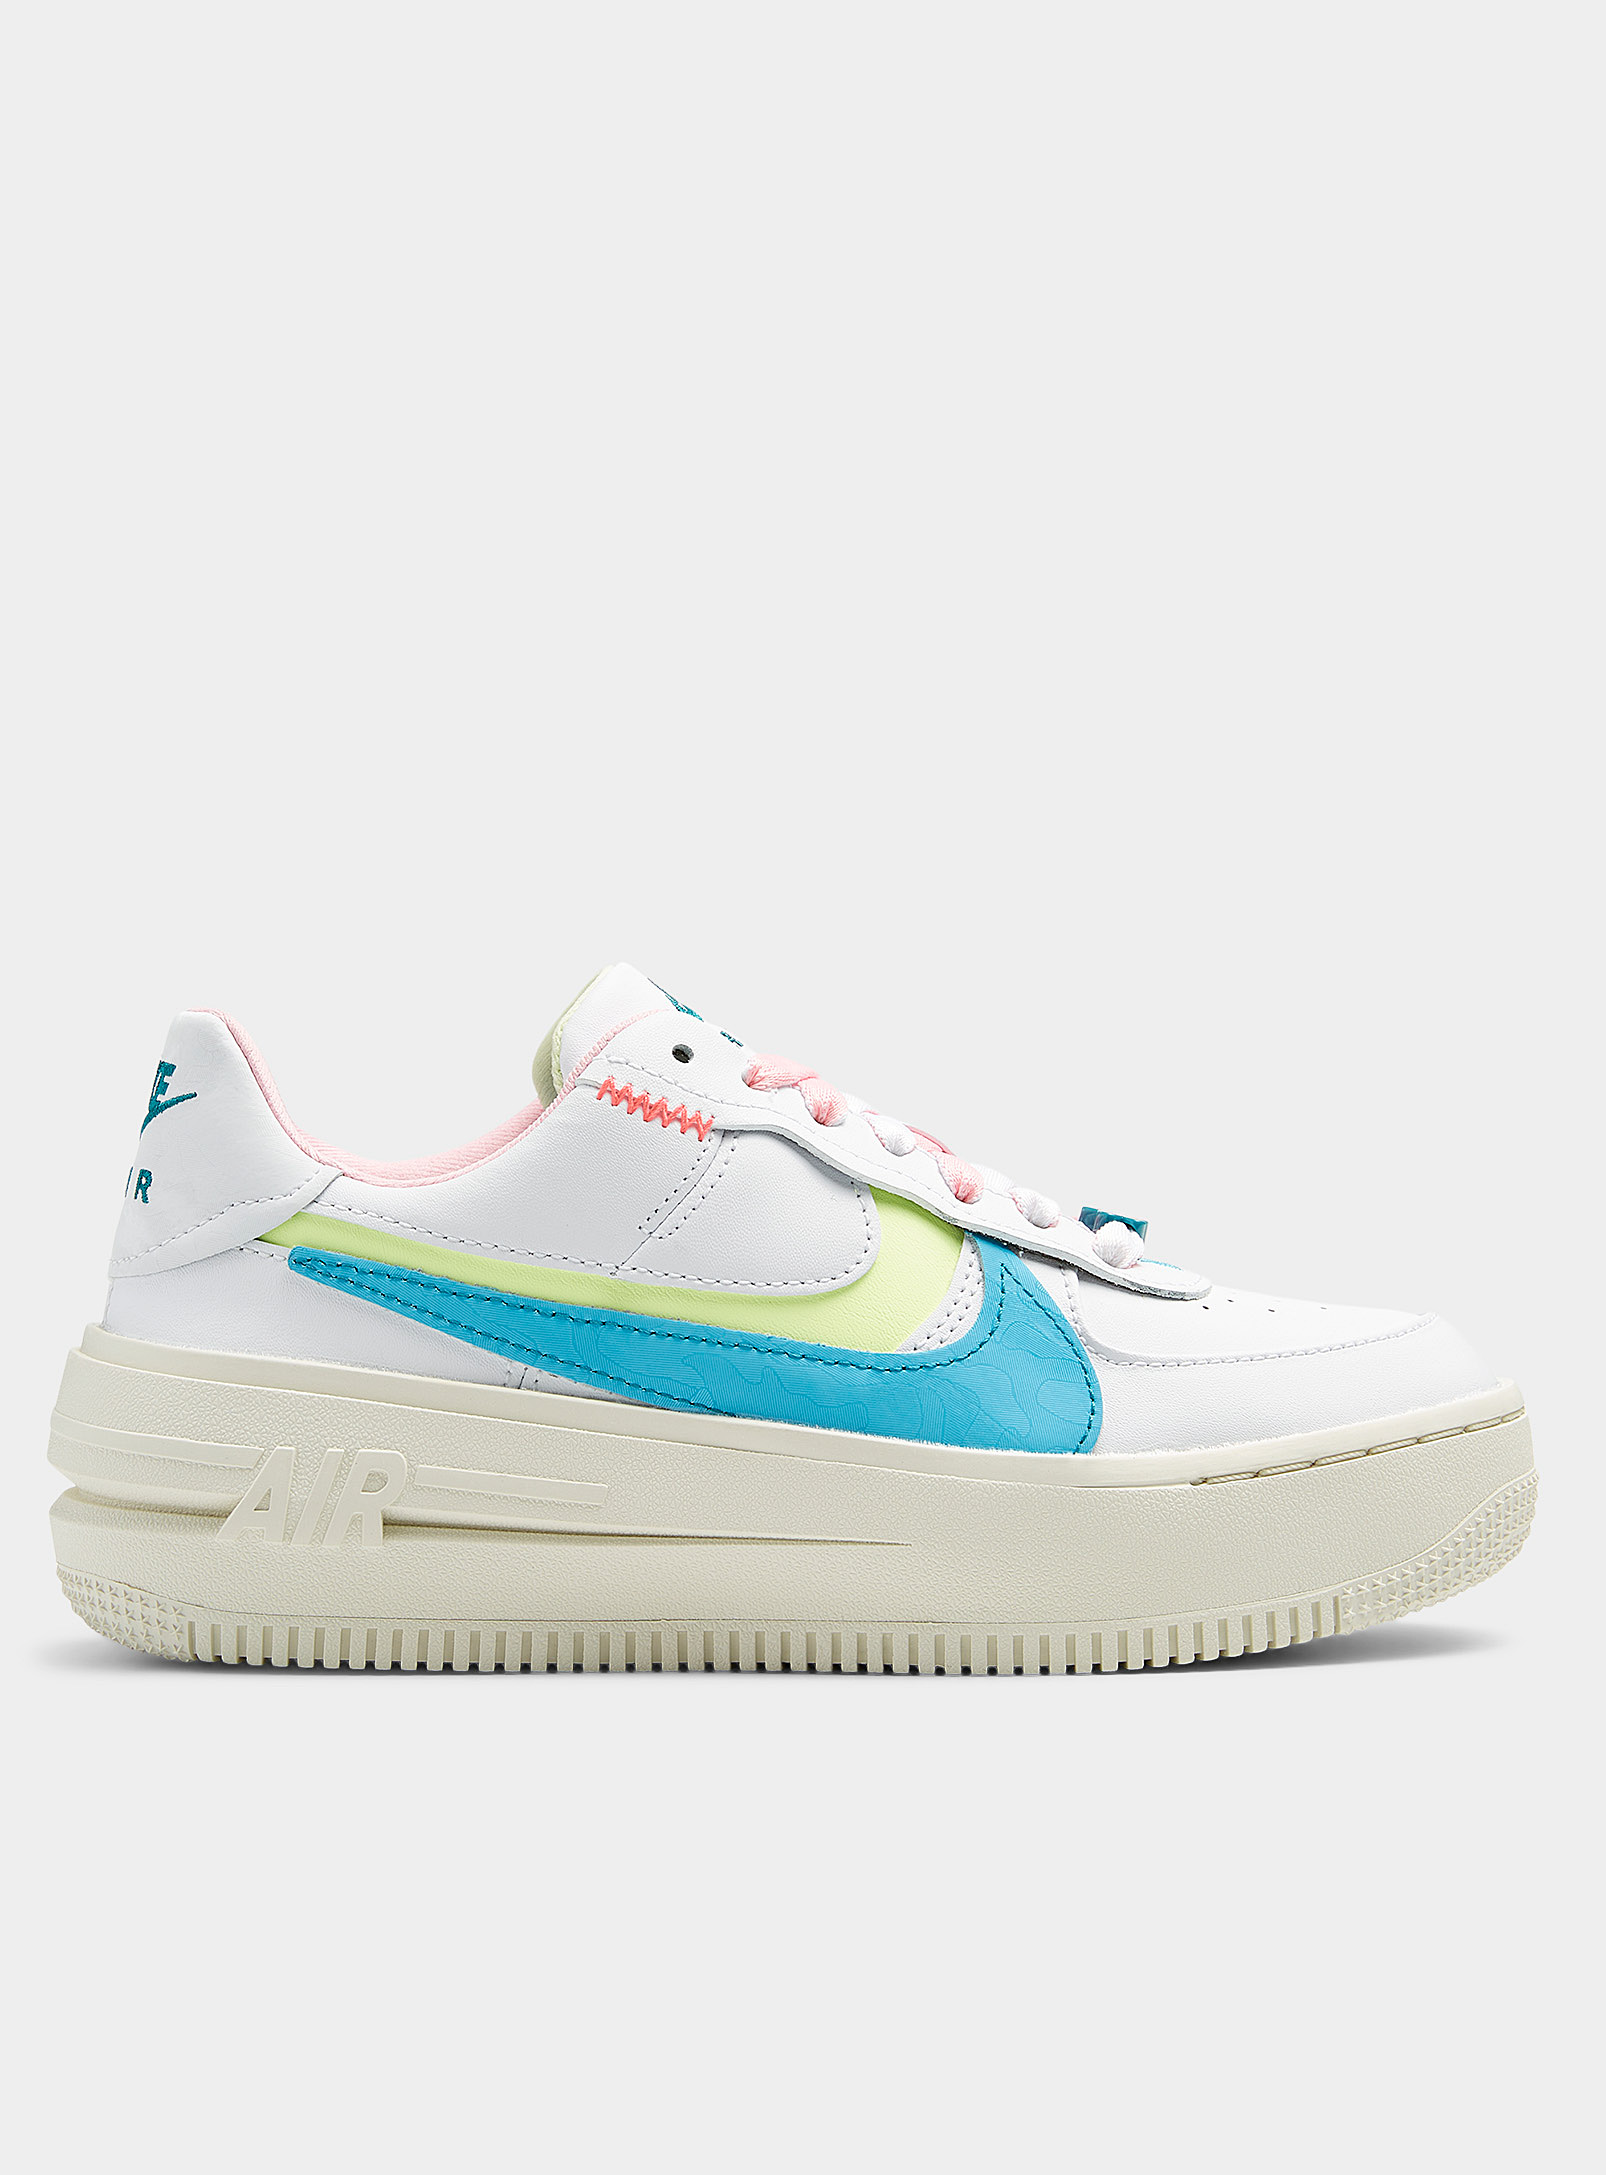 NIKE AIR FORCE 1 PLT.AF.ORM WHITE-BALTIC BLUE SNEAKERS WOMEN